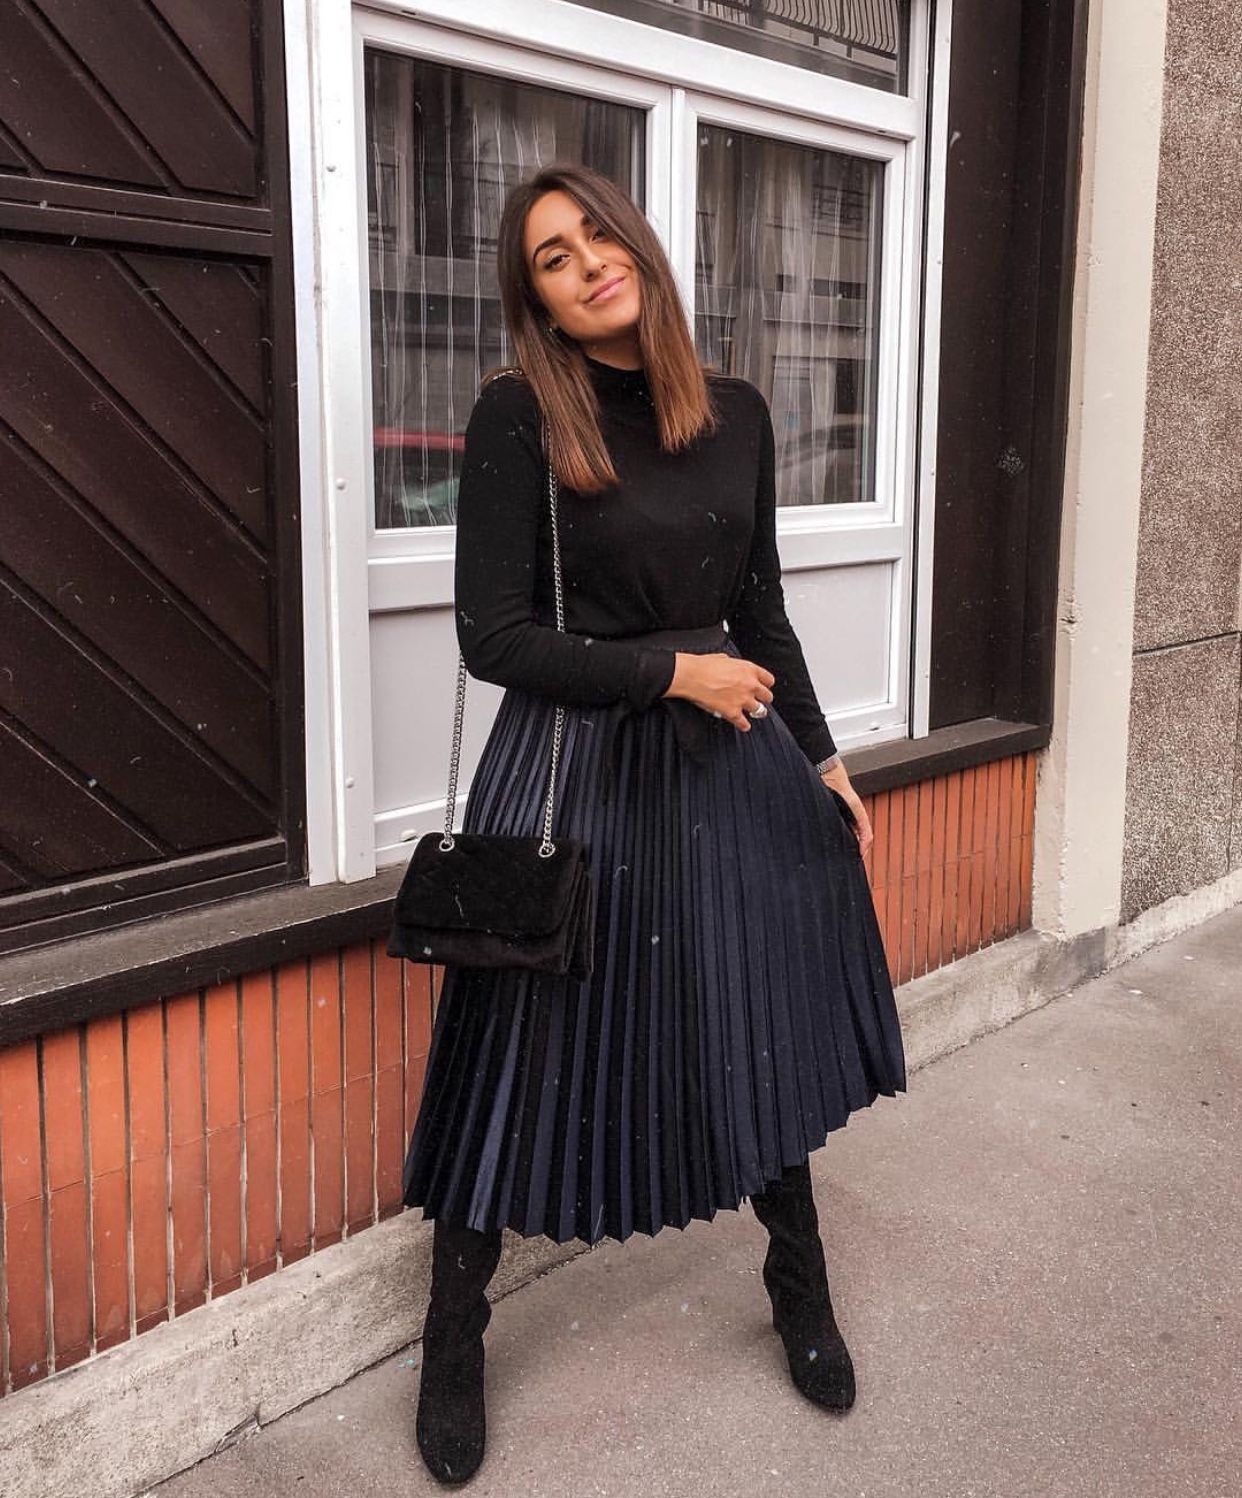 Winter Outfits With Black Skirts